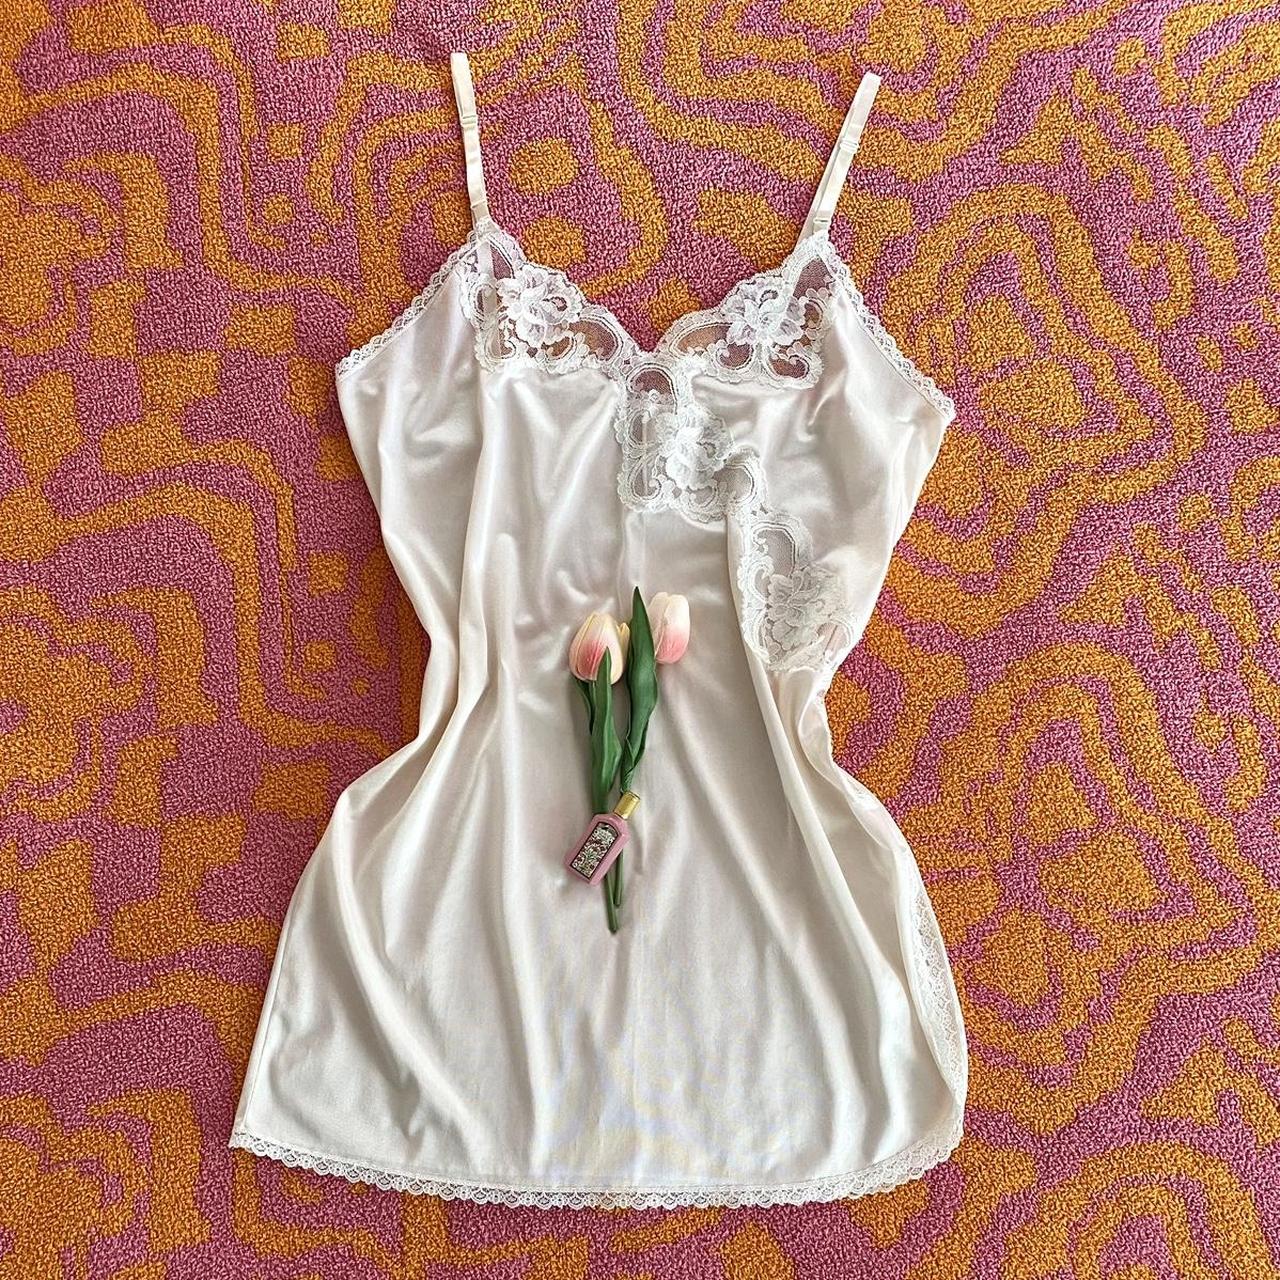 Very cute vintage white slip shorts with lace